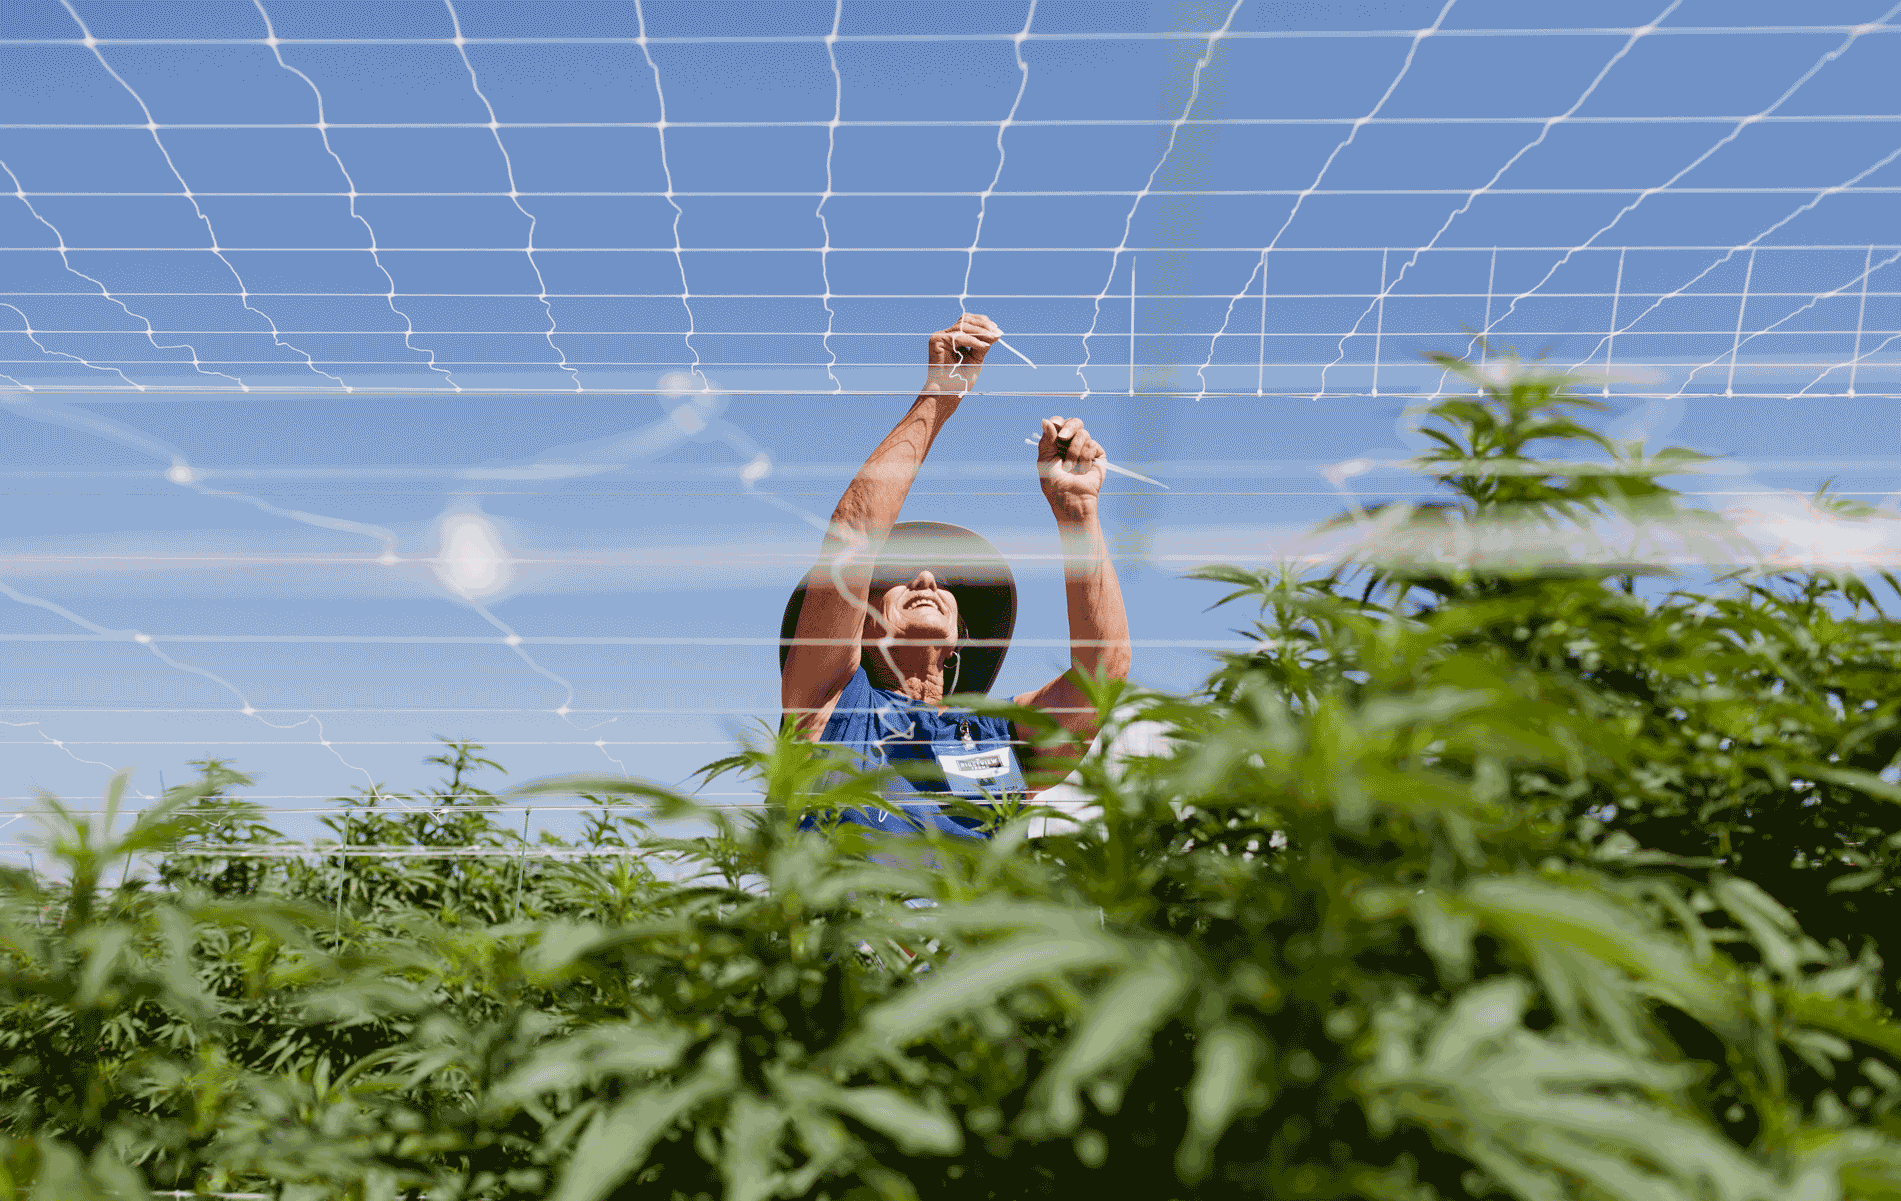 2020 Cannabis Jobs Report: Legal cannabis now supports 243,700 full